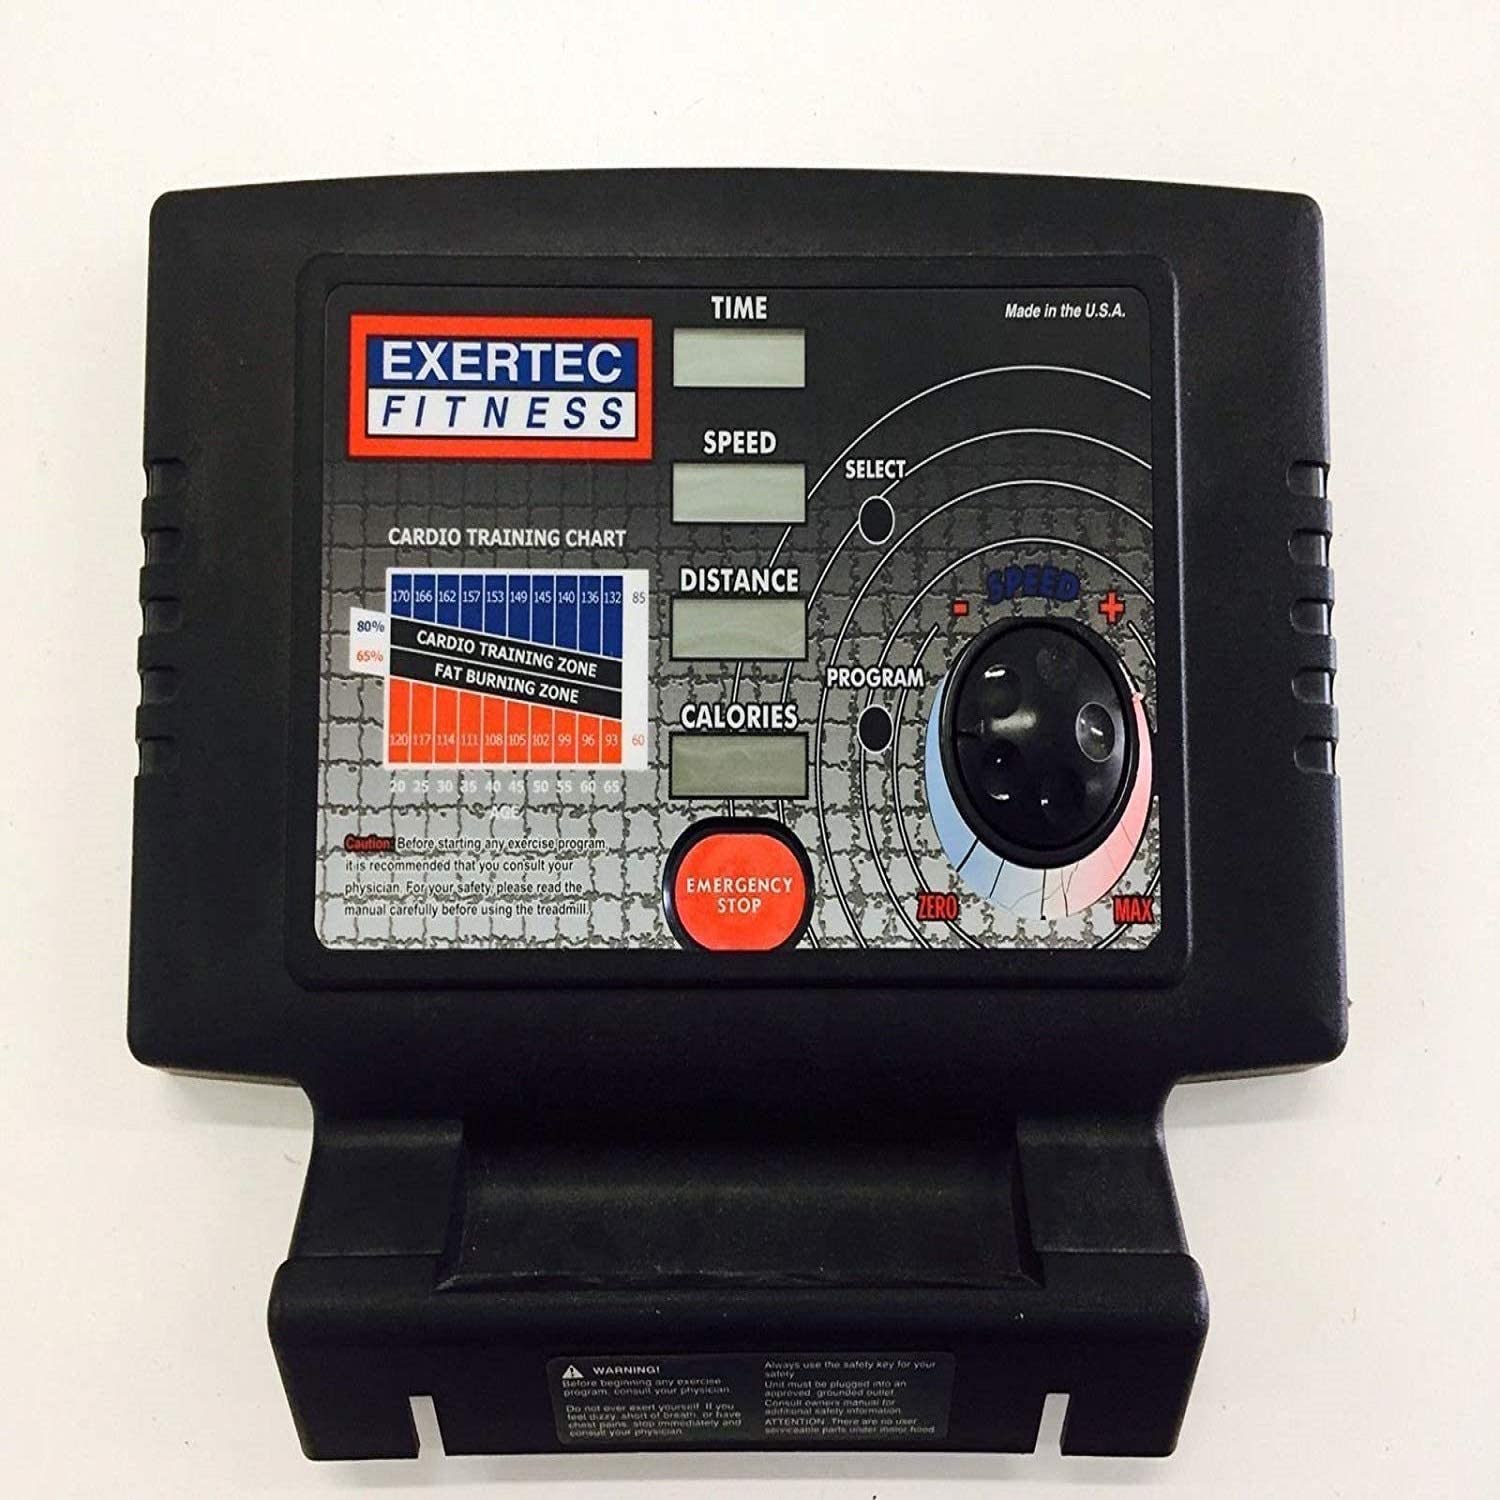 Display Console 07-0043 Electronic Board Overlay Works with Keys Fitness Pro 550 Treadmill (Used)